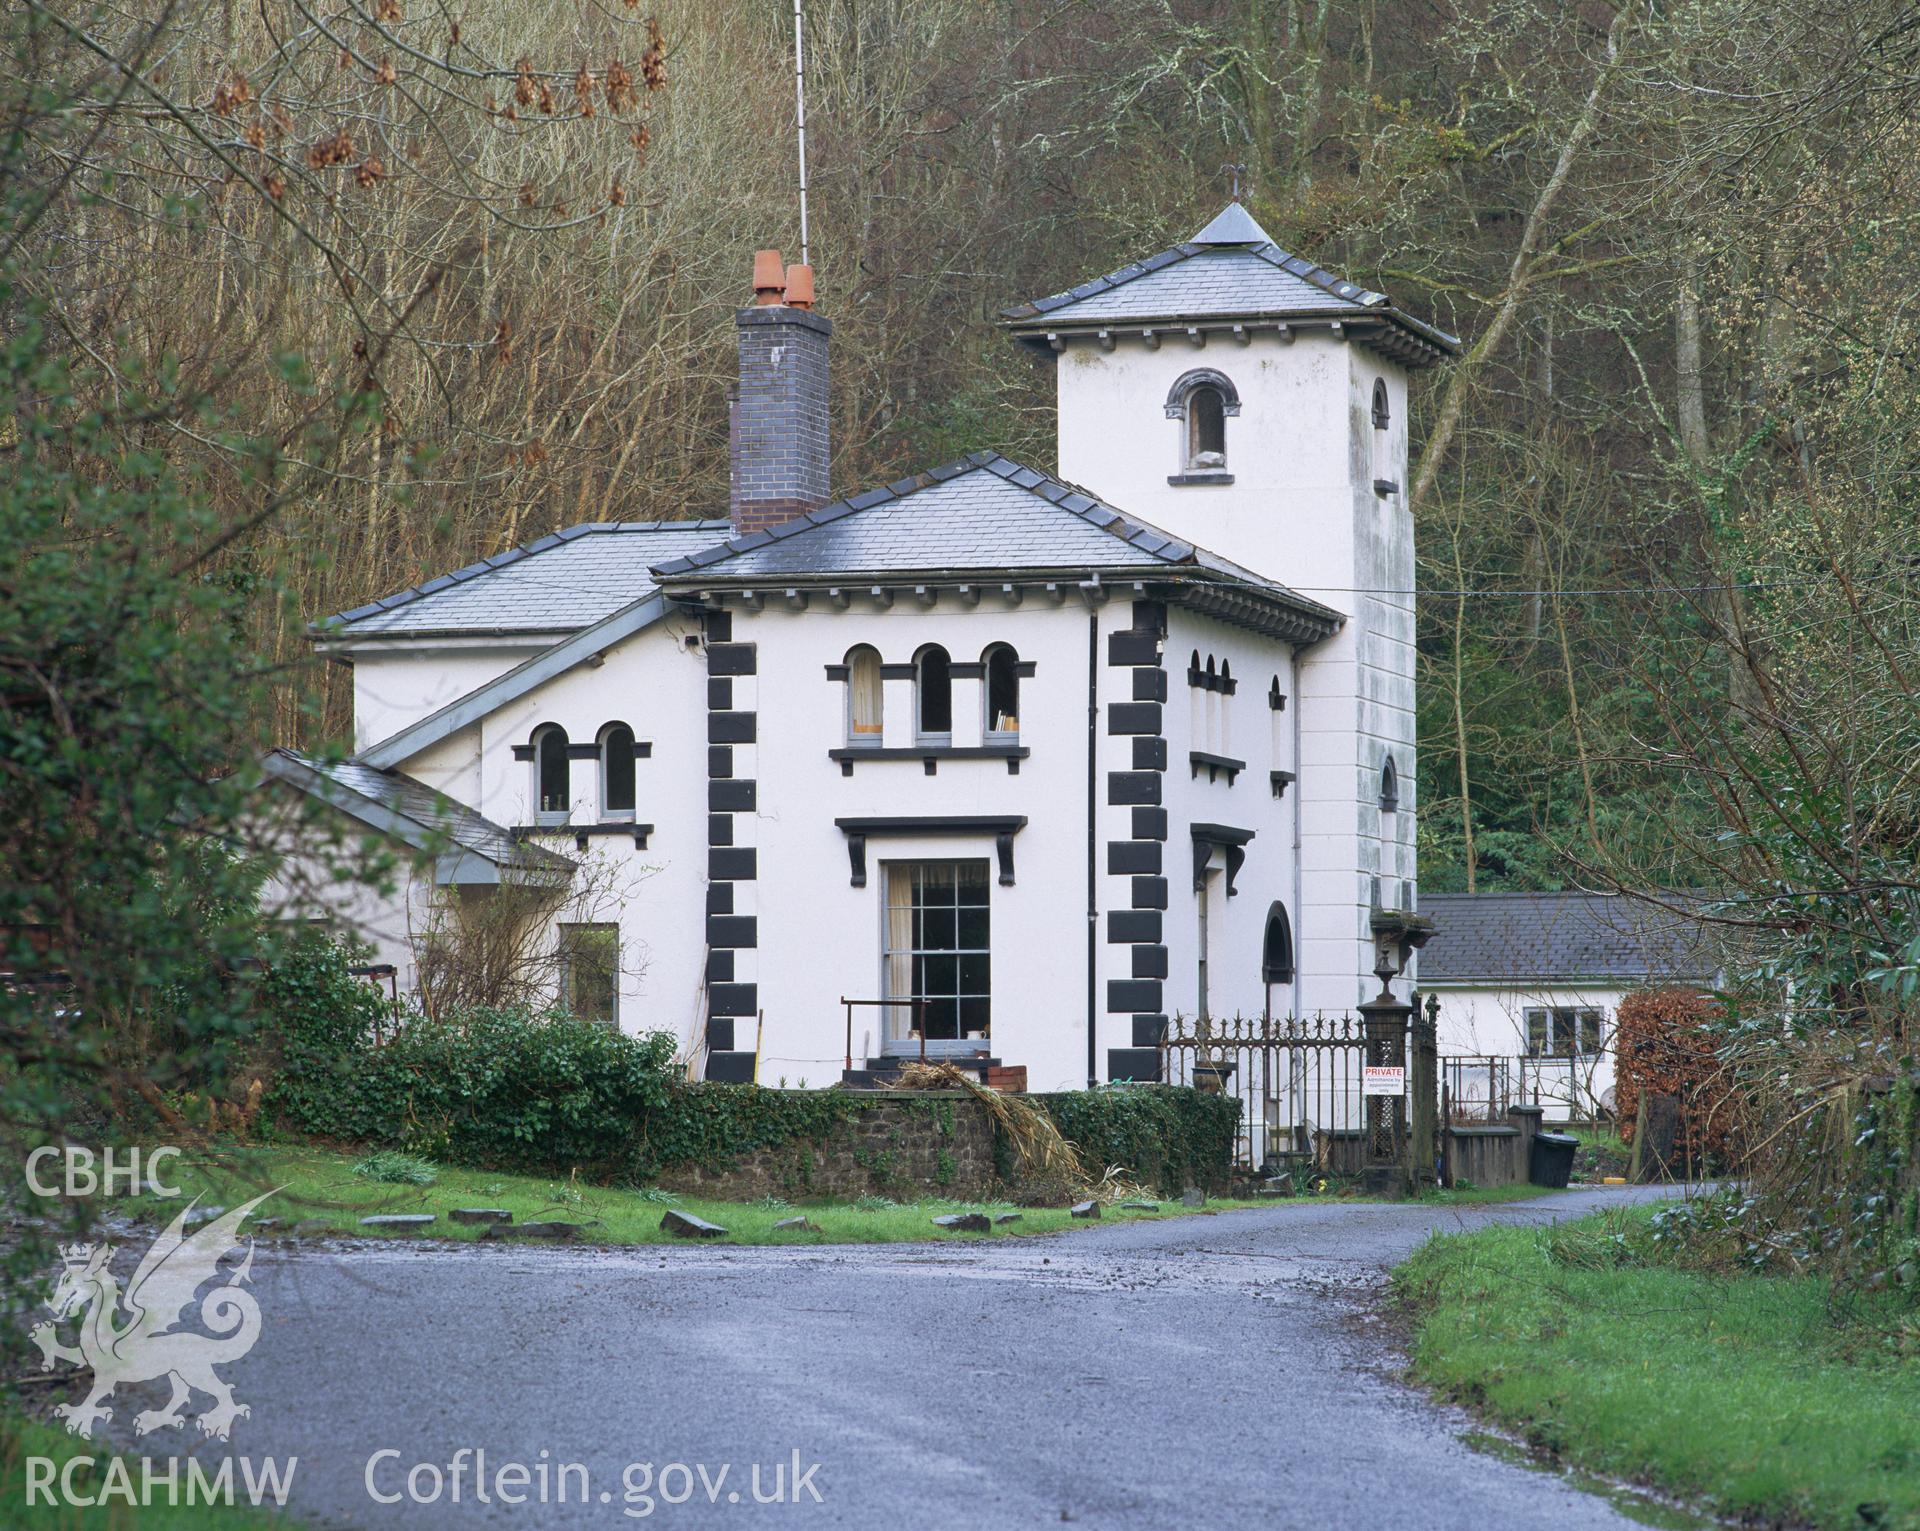 Colour transparency showing exterior view of Nanteos Lodge, Ceredigion, produced by Iain Wright, June 2004.